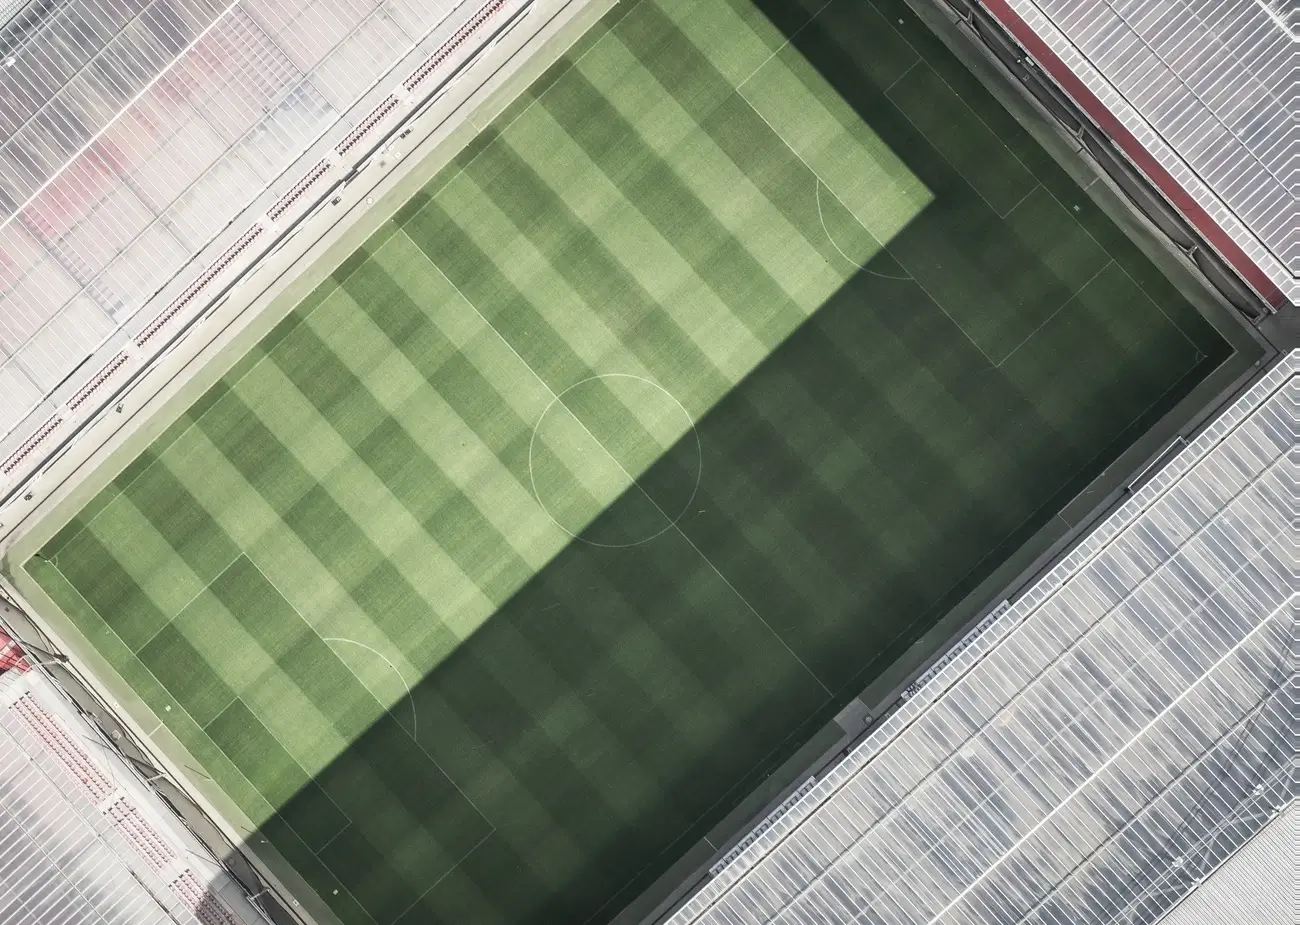 Aerial view of football pitch loading=